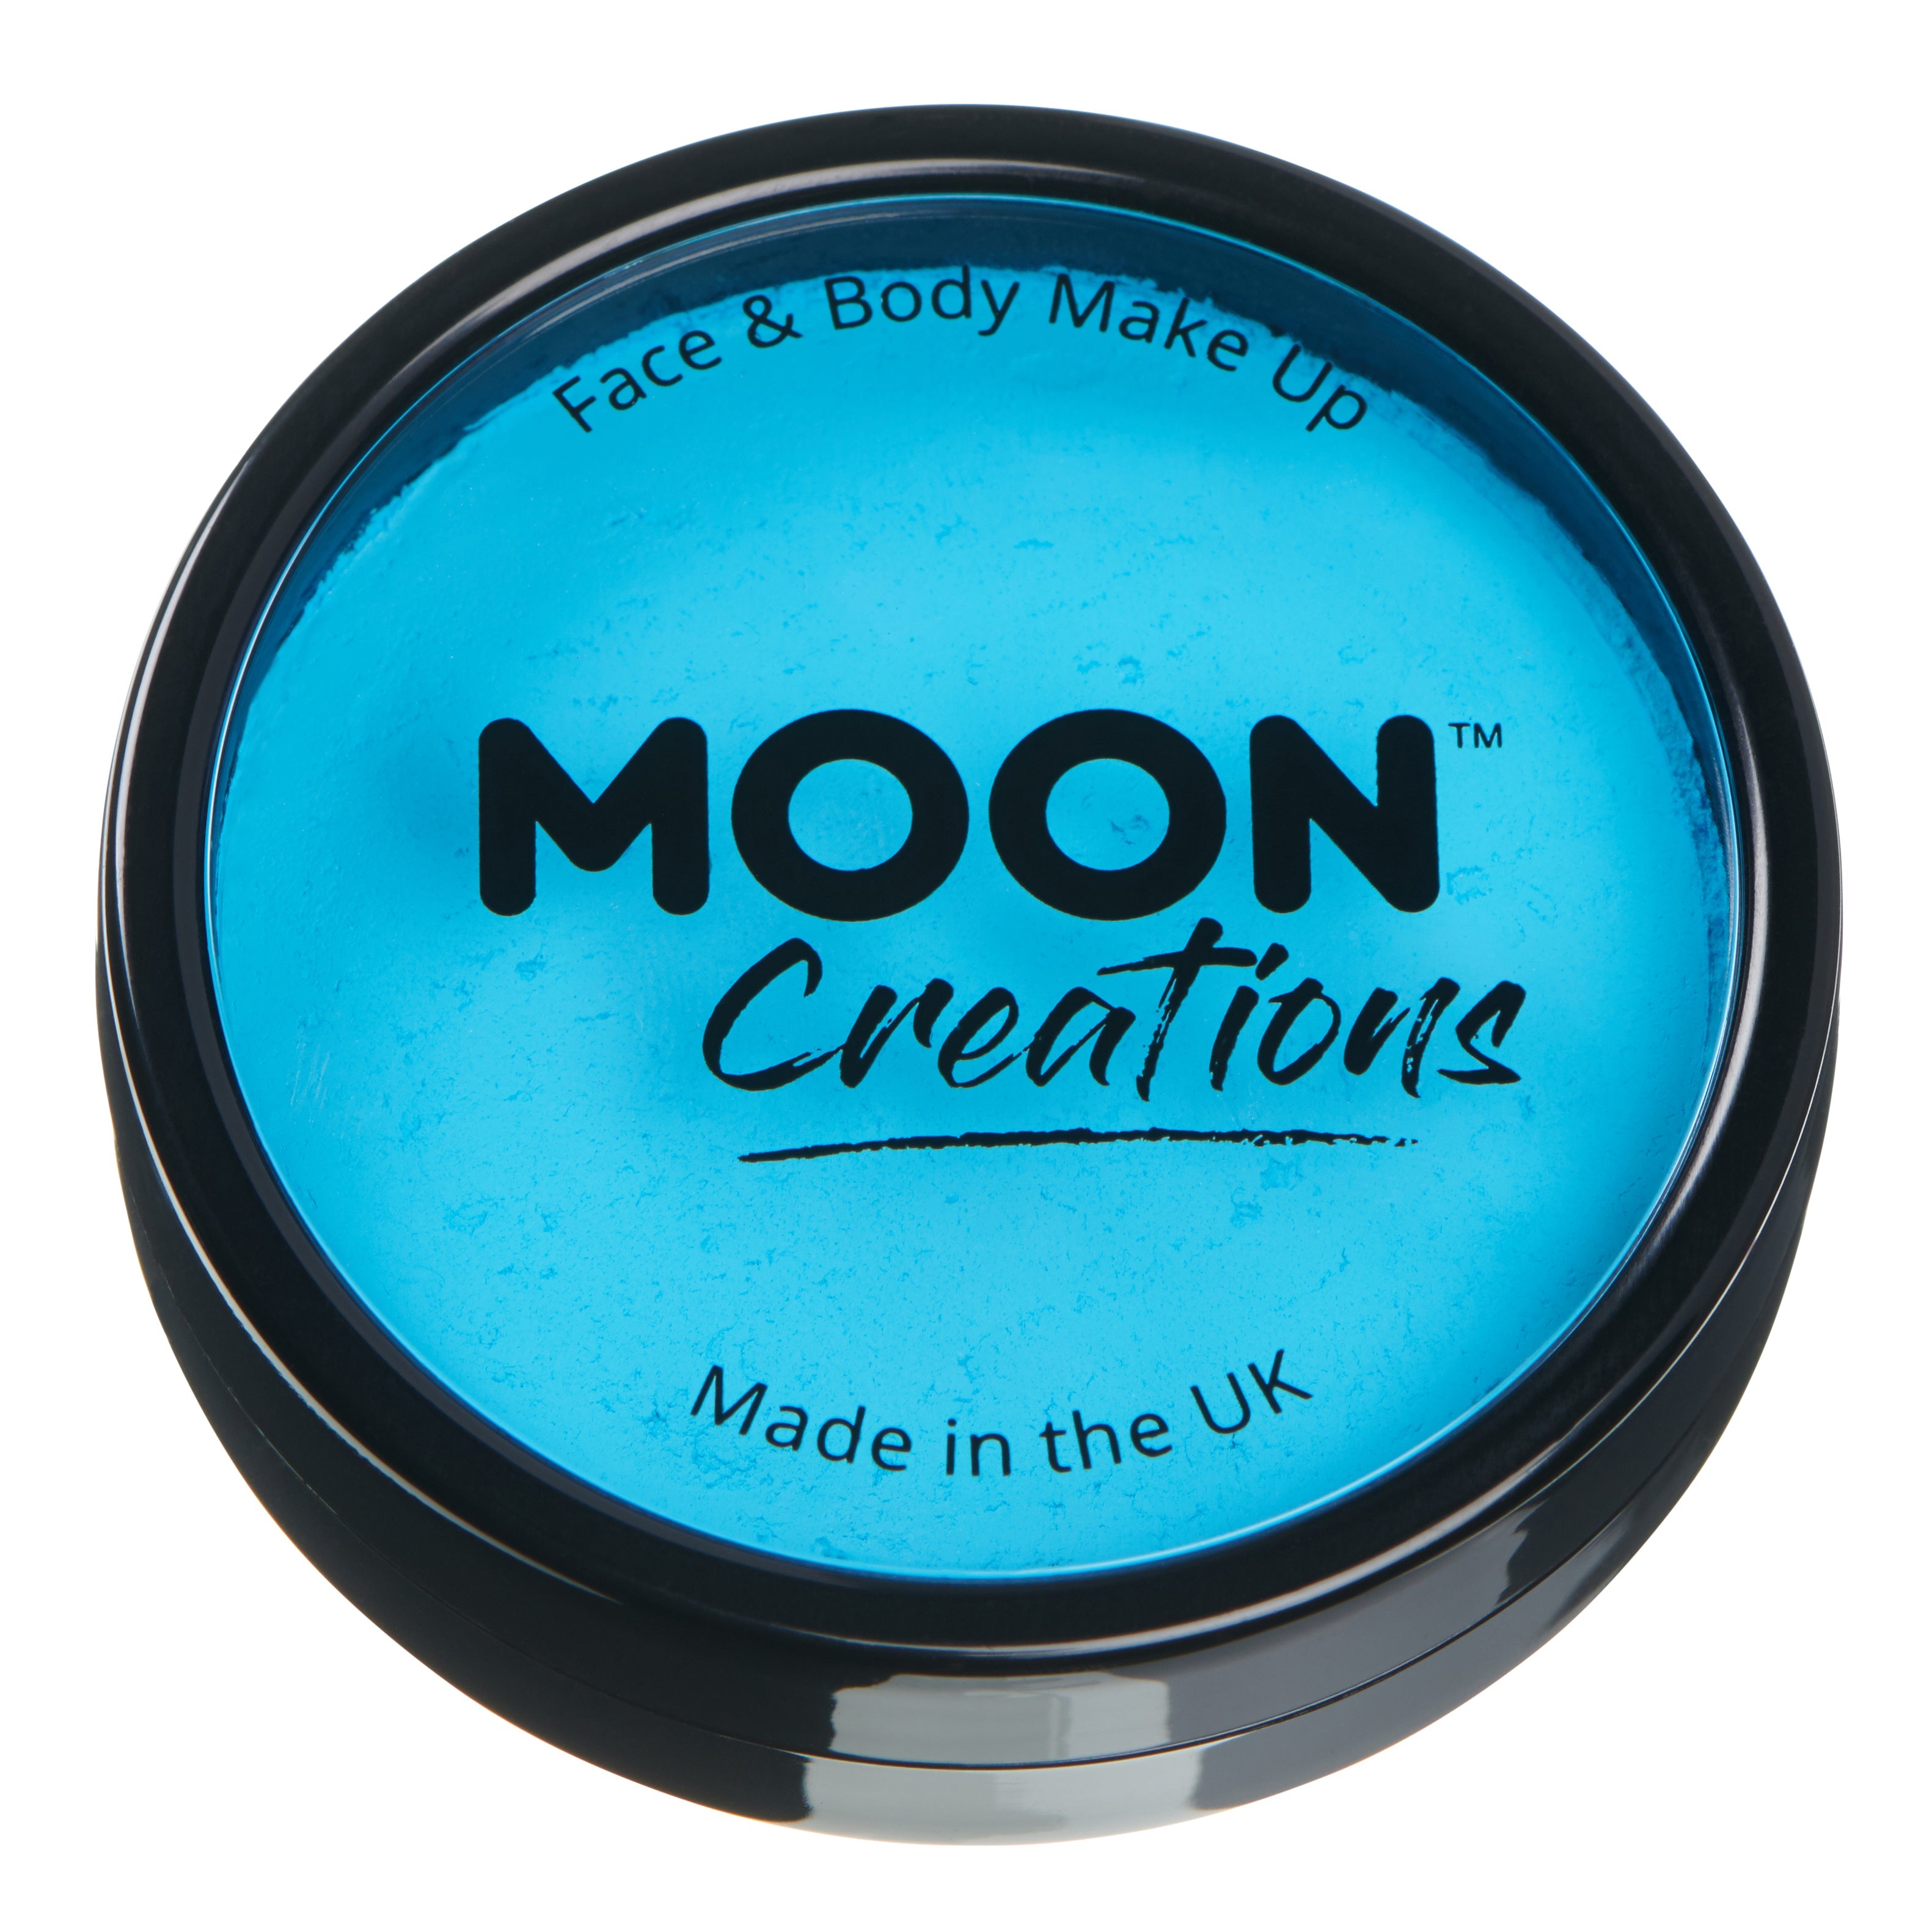 Aqua - Professional Face Paint, 36g. Cosmetically certified, FDA & Health Canada compliant, cruelty free and vegan.